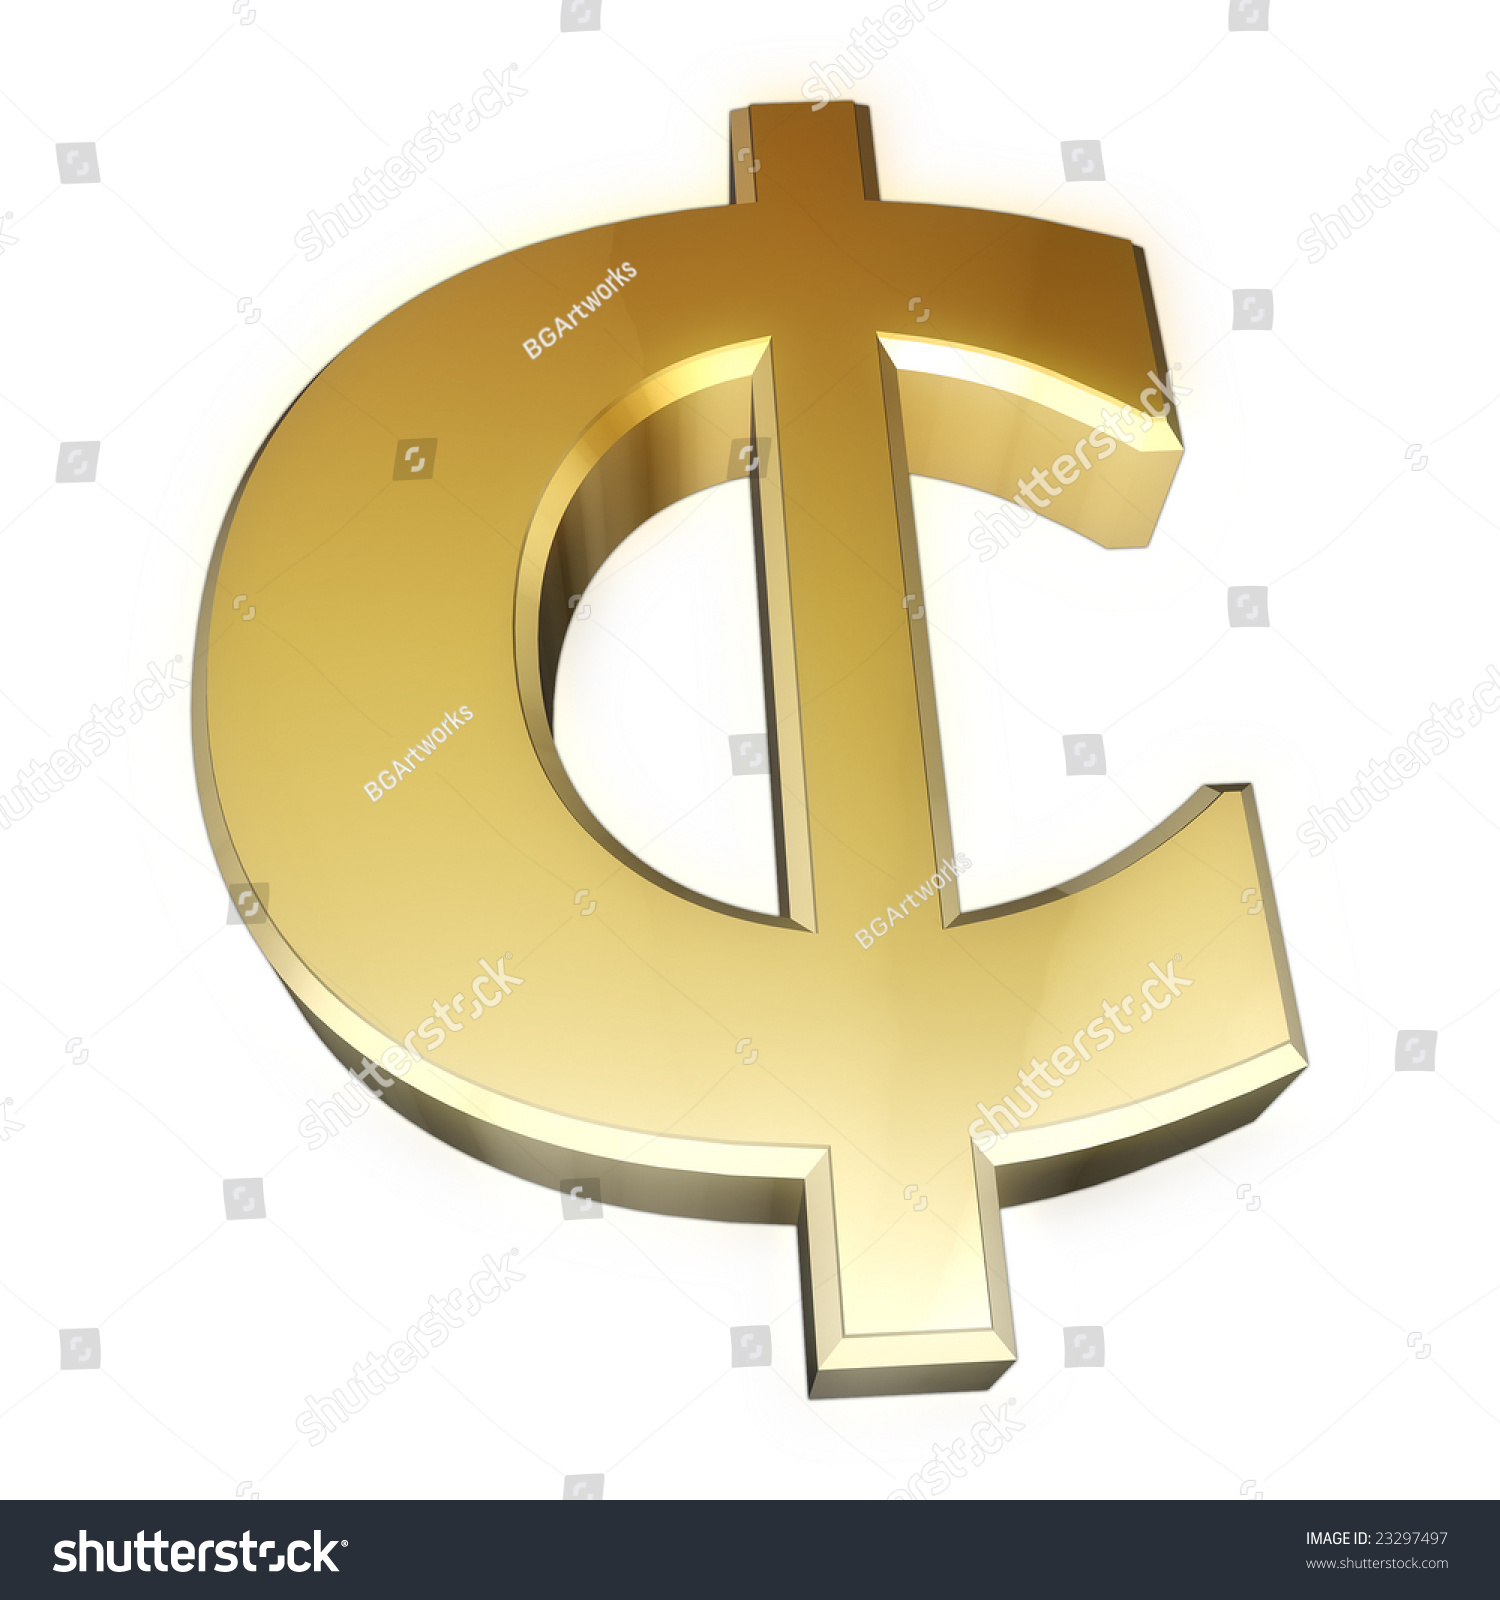 Gold Cent Sign. Perspective View. Stock Photo 23297497 : Shutterstock